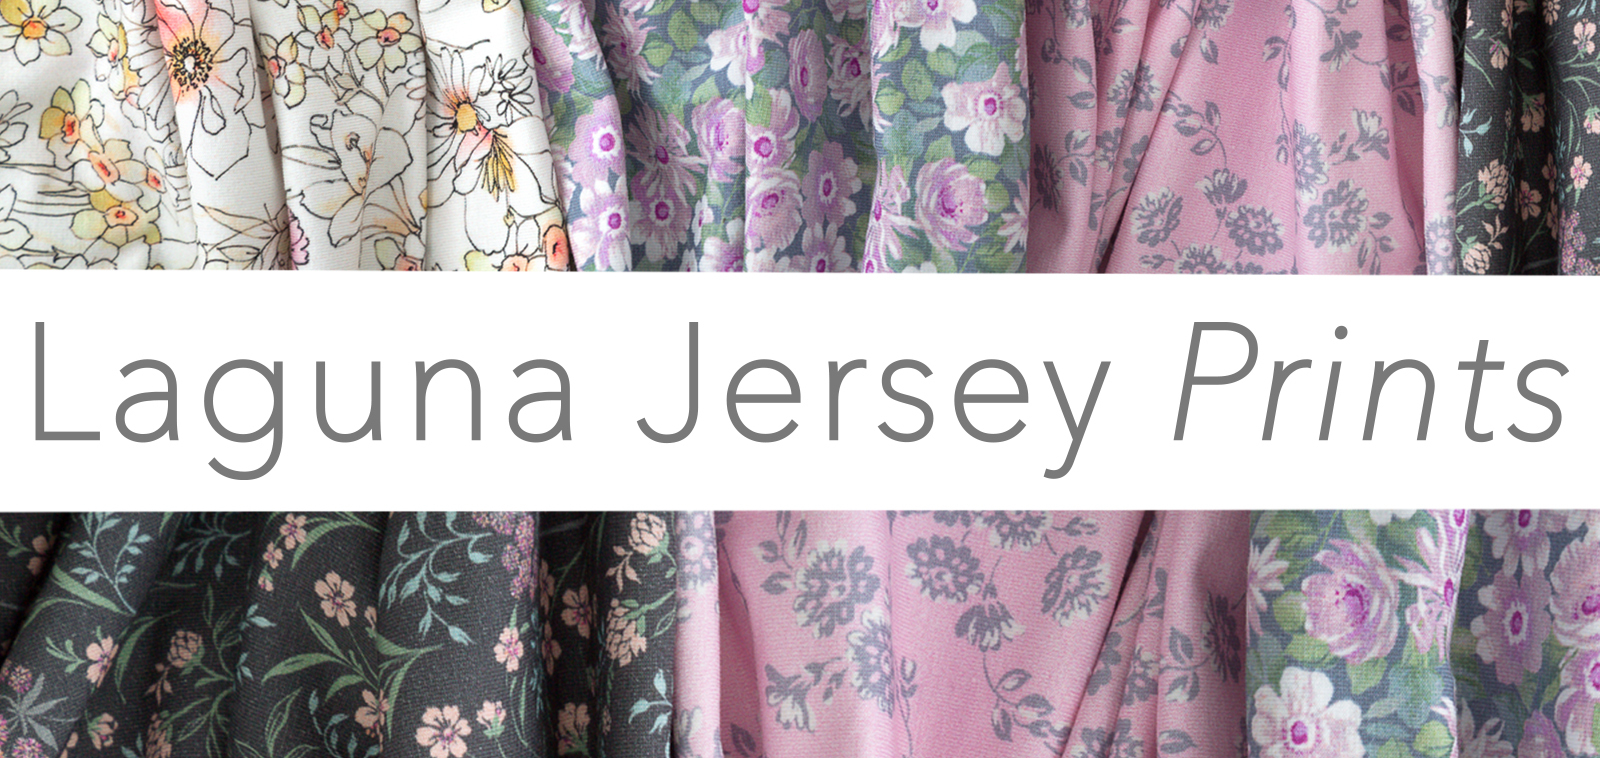 What Is Jersey Knit Fabric? - Complete Guide - Fabrics by the Yard